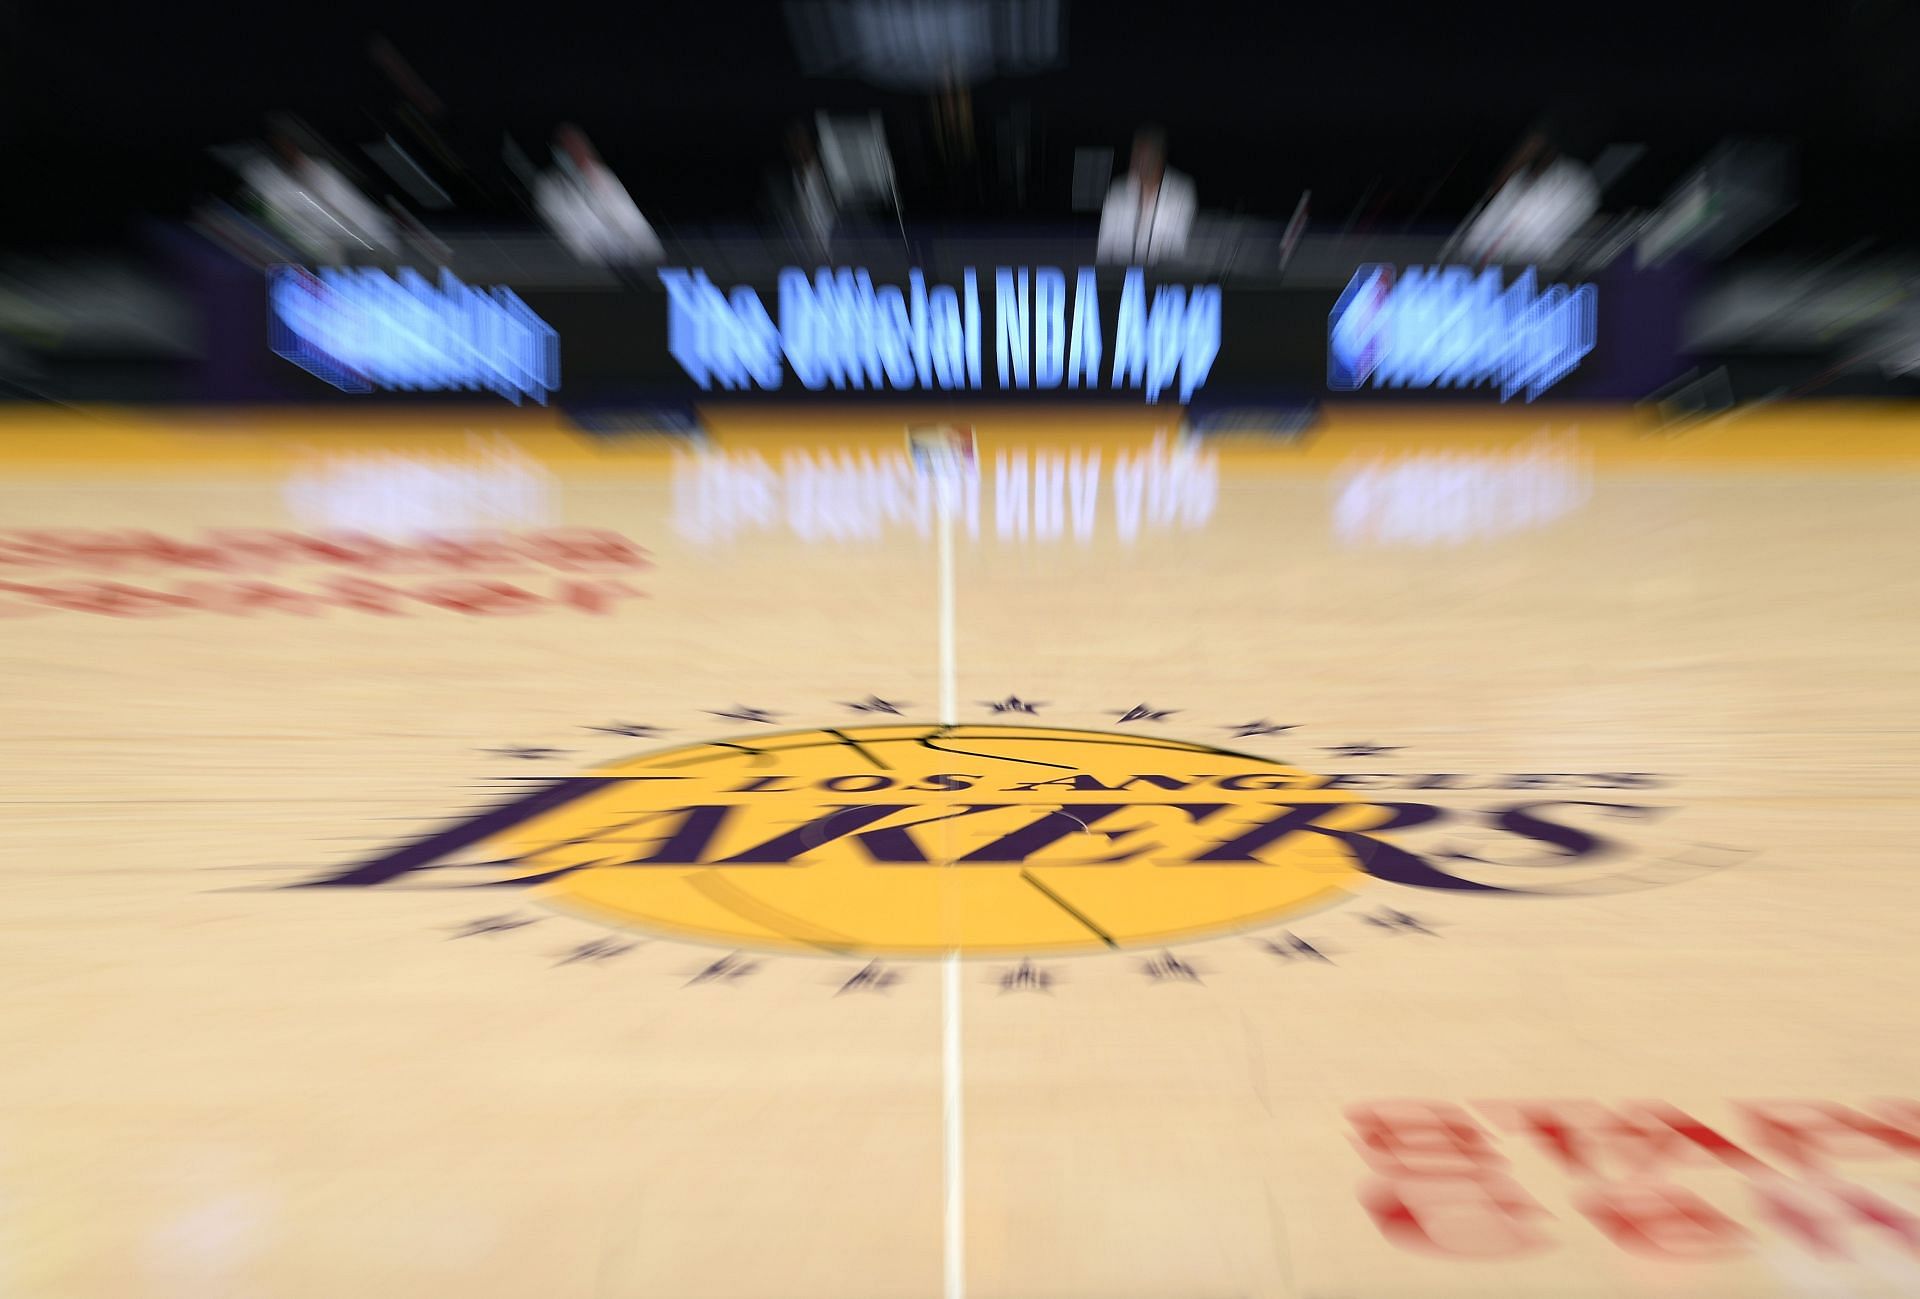 Lakers&#039; logo seen on the basketball court during an NBA game.